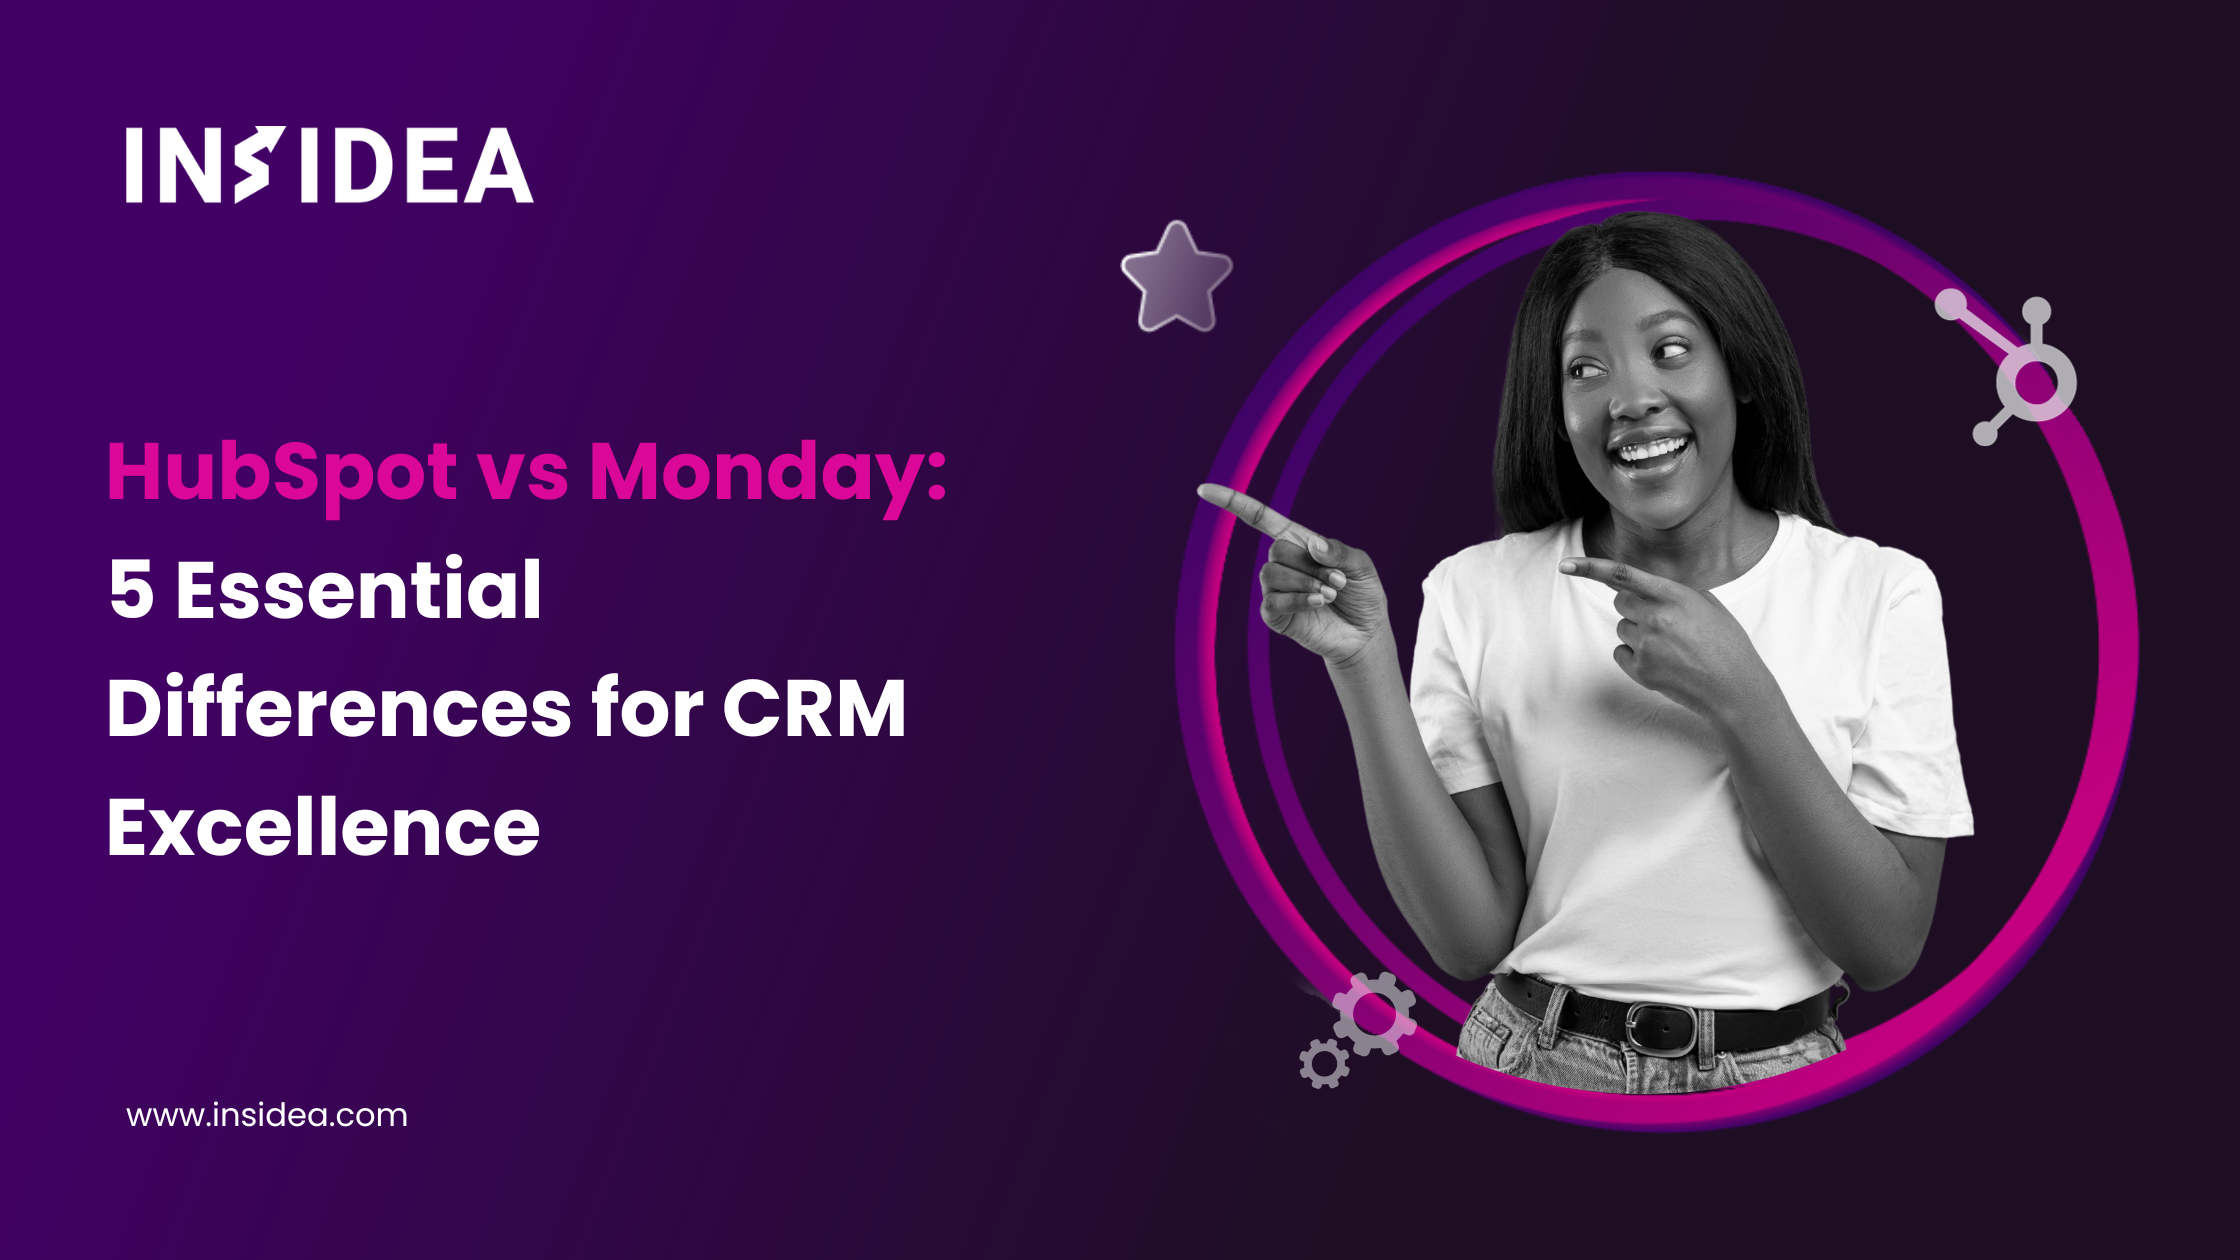 HubSpot vs Monday 5 Essential Differences for CRM Excellence